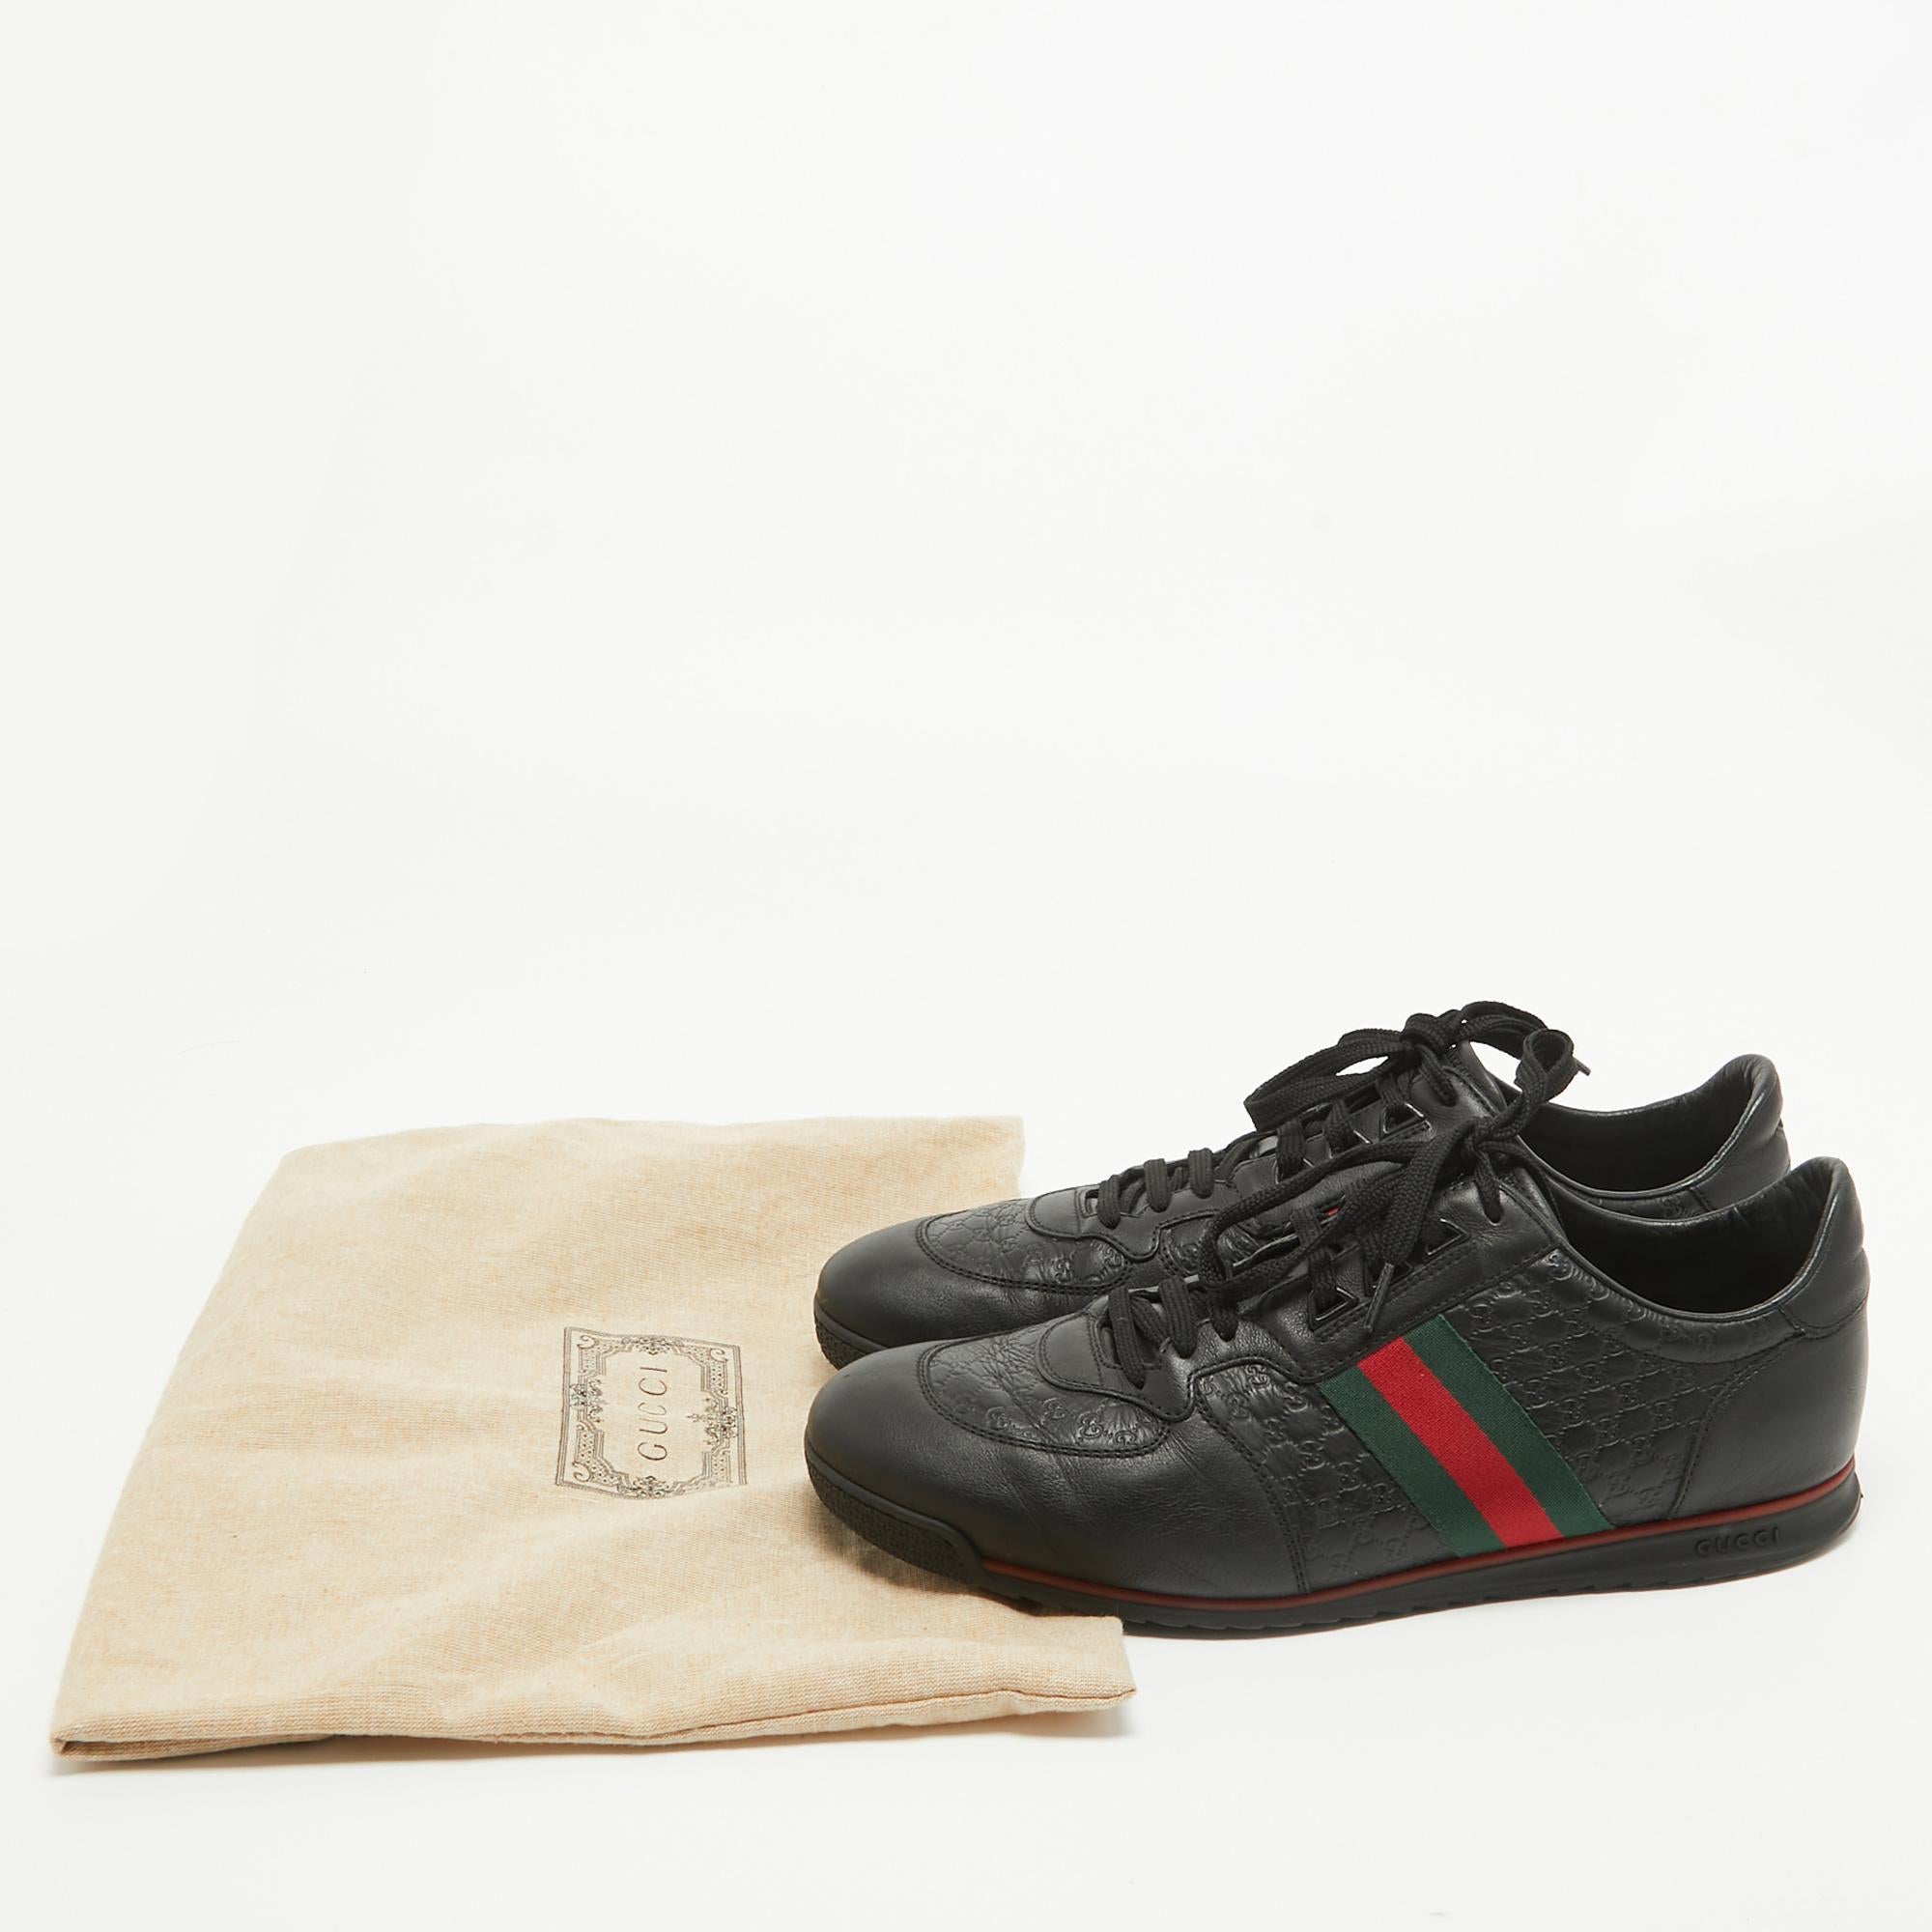 Gucci Black Guccissima Leather Web Ace Sneakers Size 45.5 For Sale 5